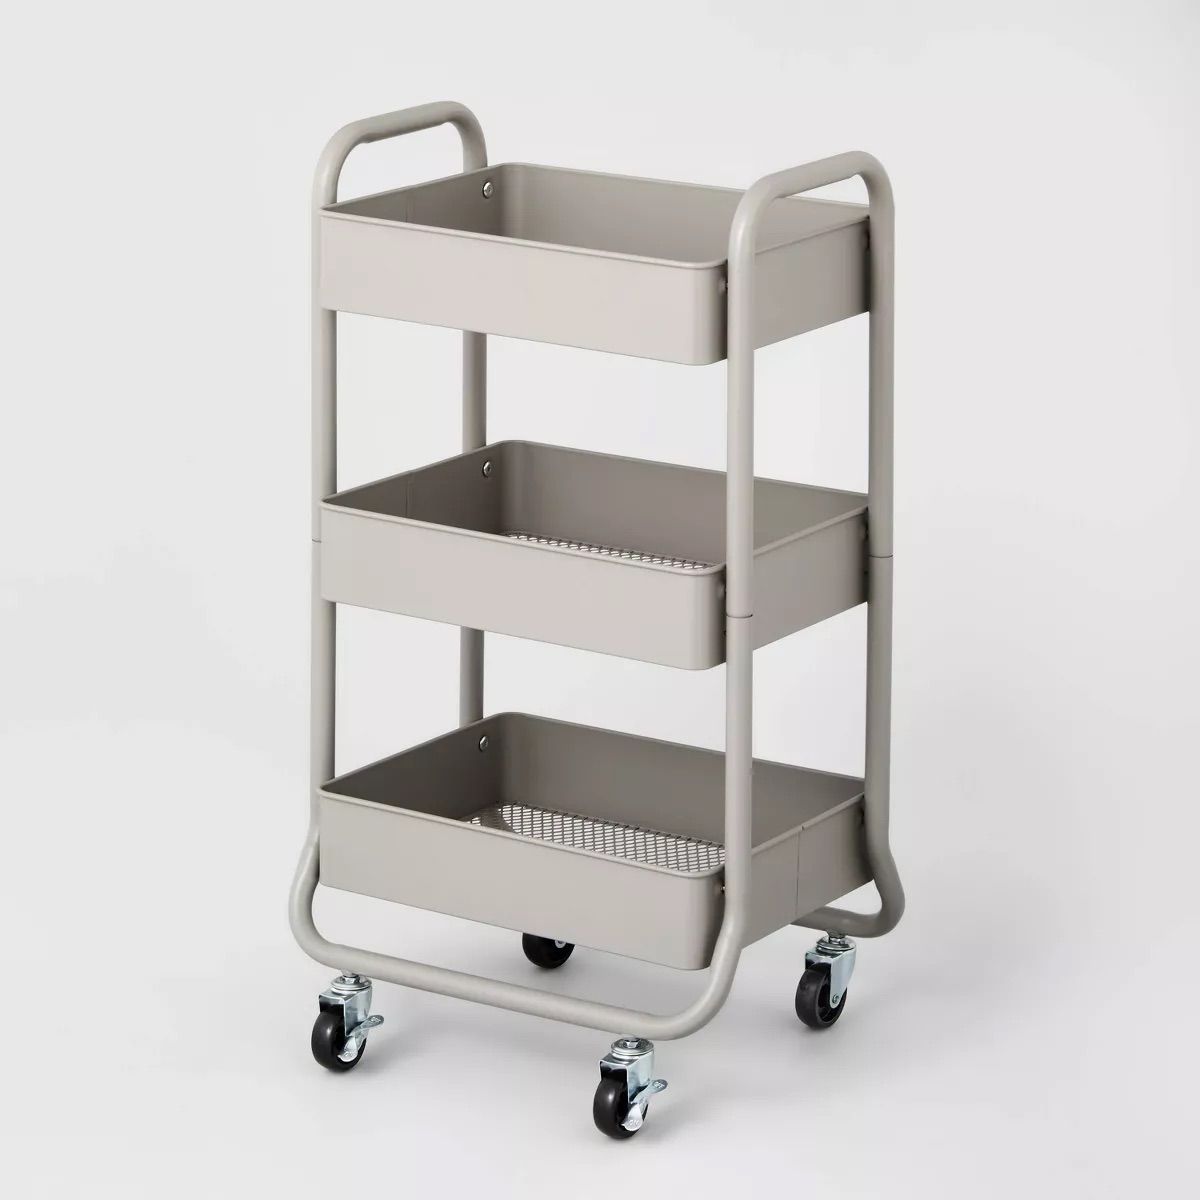 Styling a Rolling Cart in 3 Different Ways